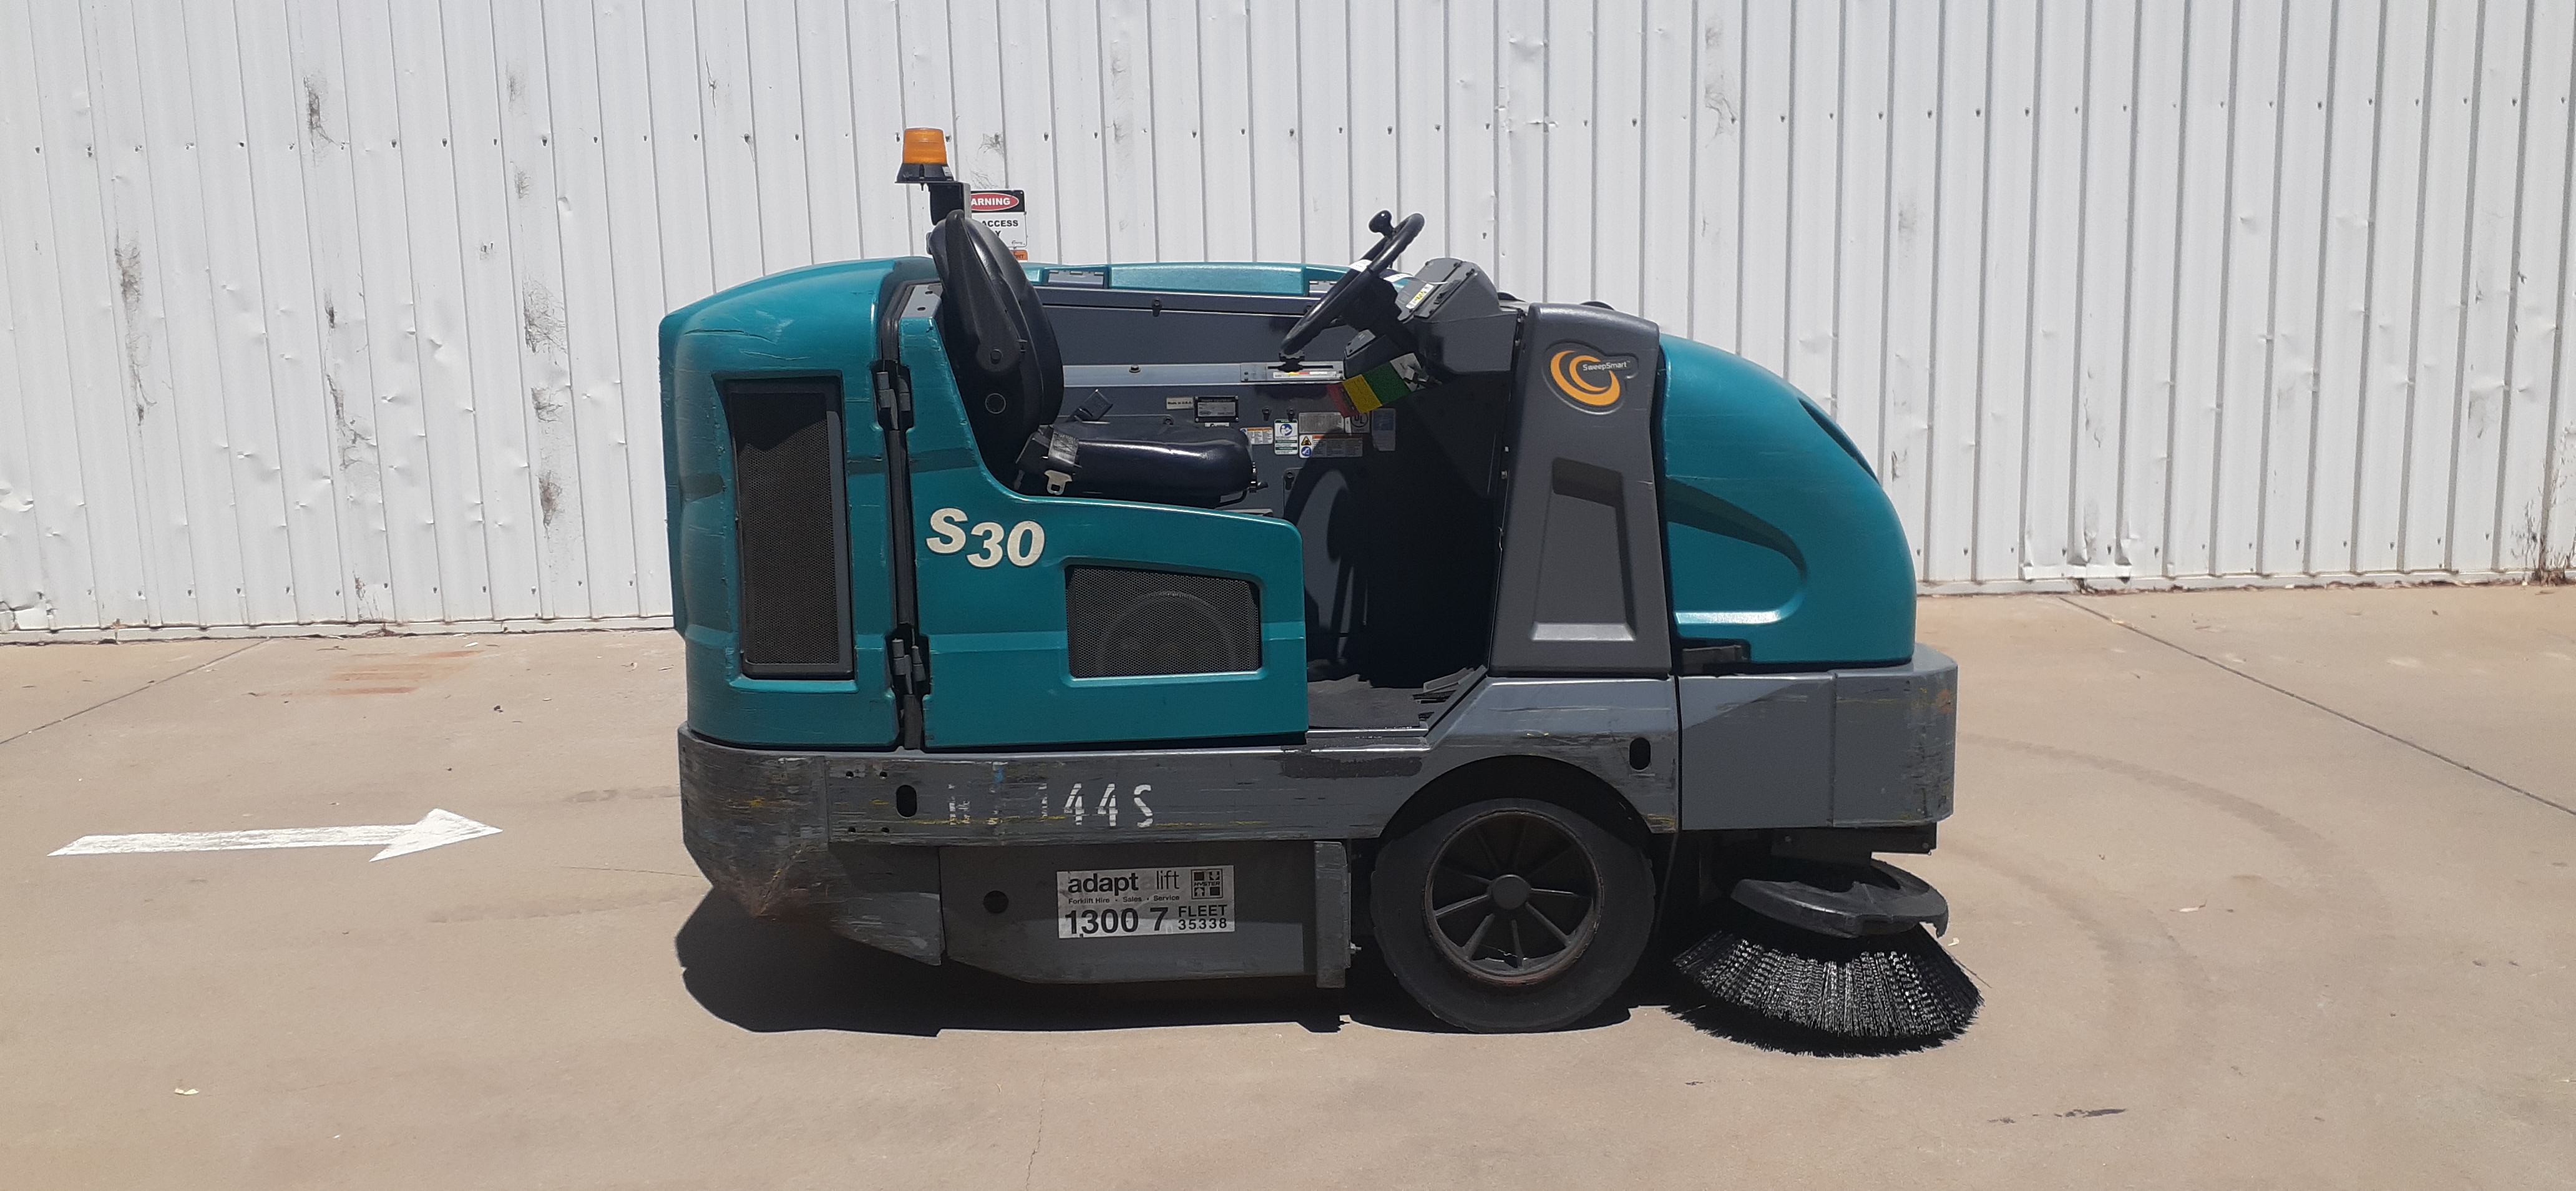 Used forklift: TENNANT S30XP 